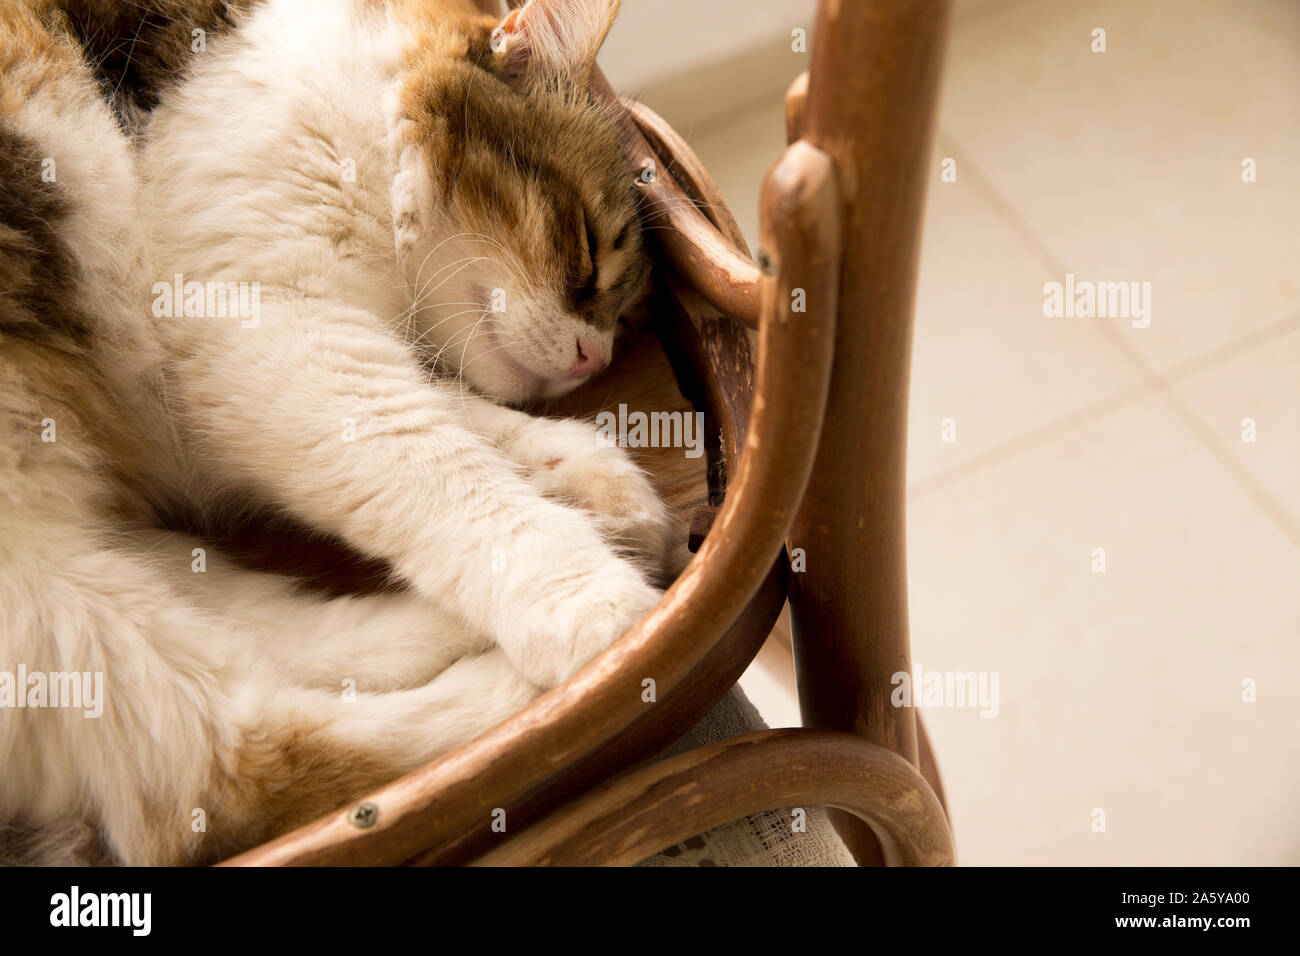 Close up high angle view of a beautiful calico cat enjoying sleep on a reversed rustic chair with some copy space. Stock Photo